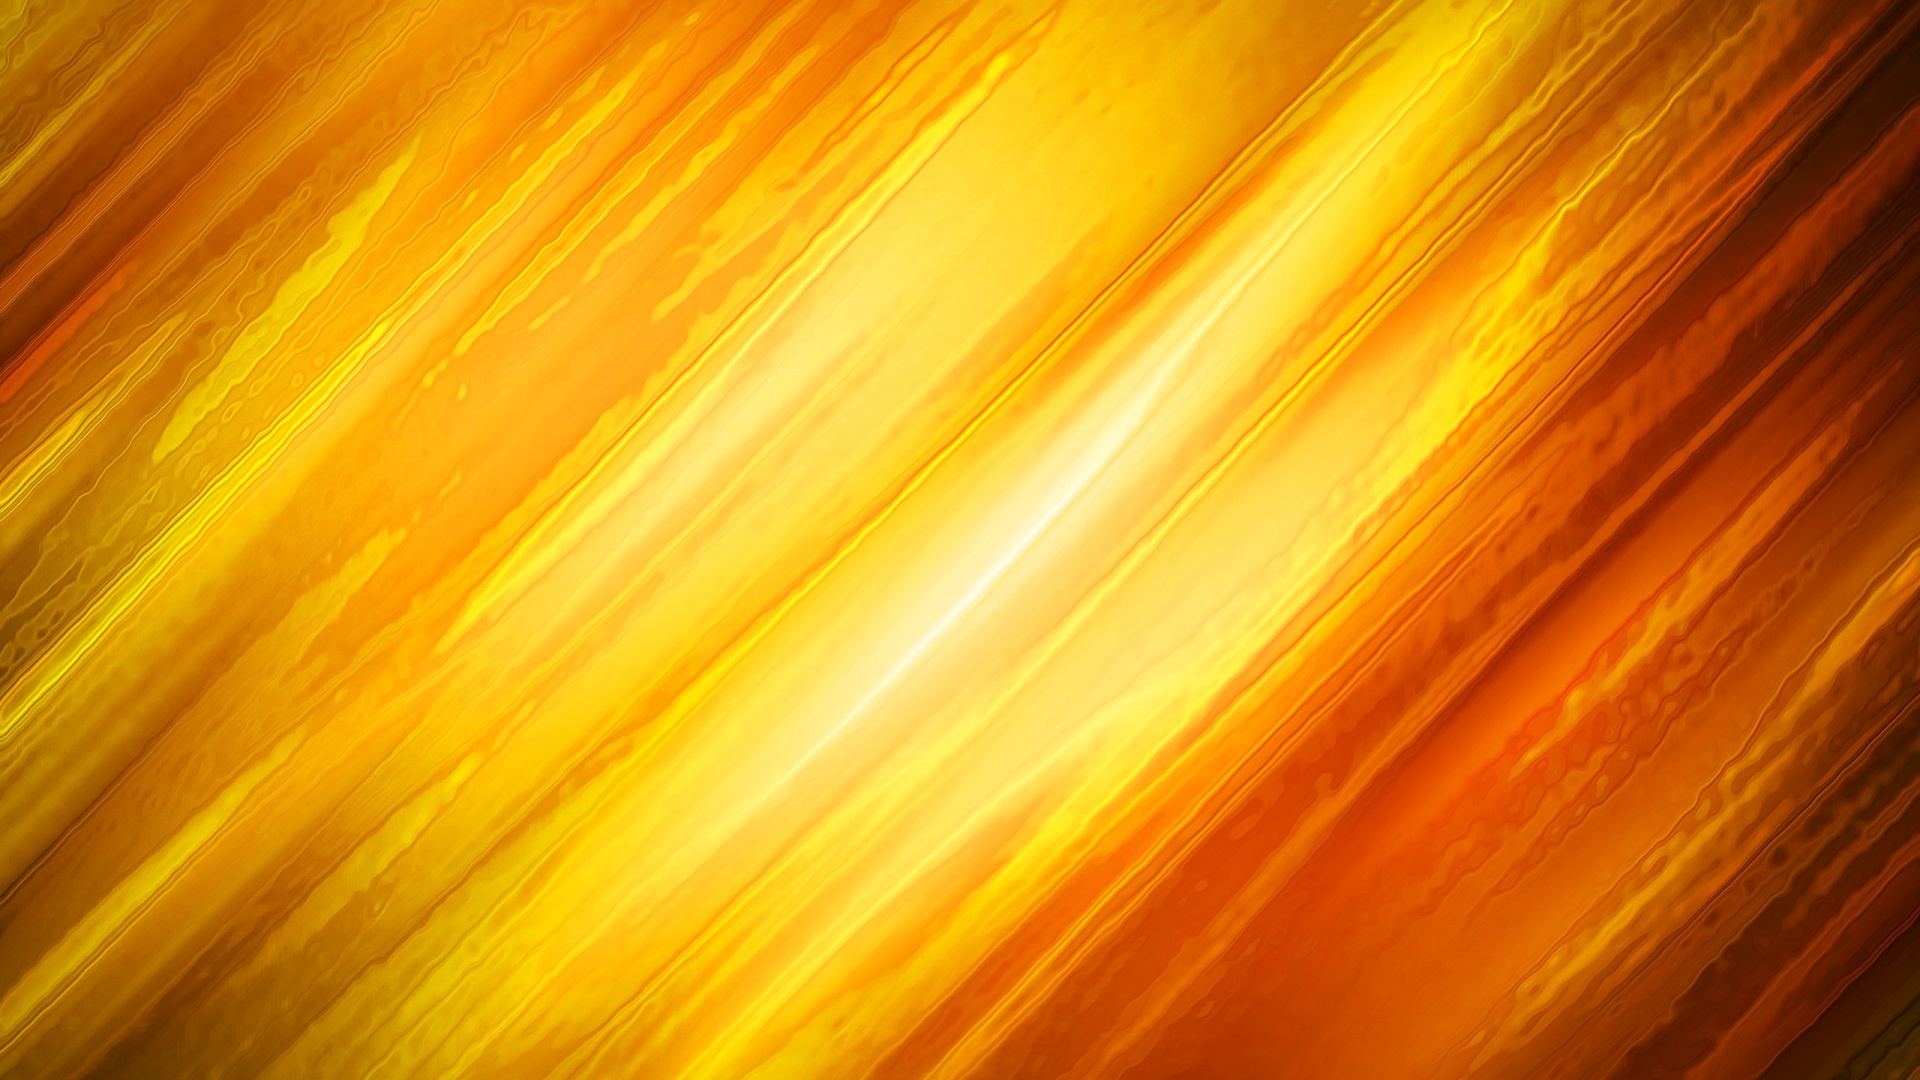 wallpapers background orange yellow abstract 1920x1080 1920x1080